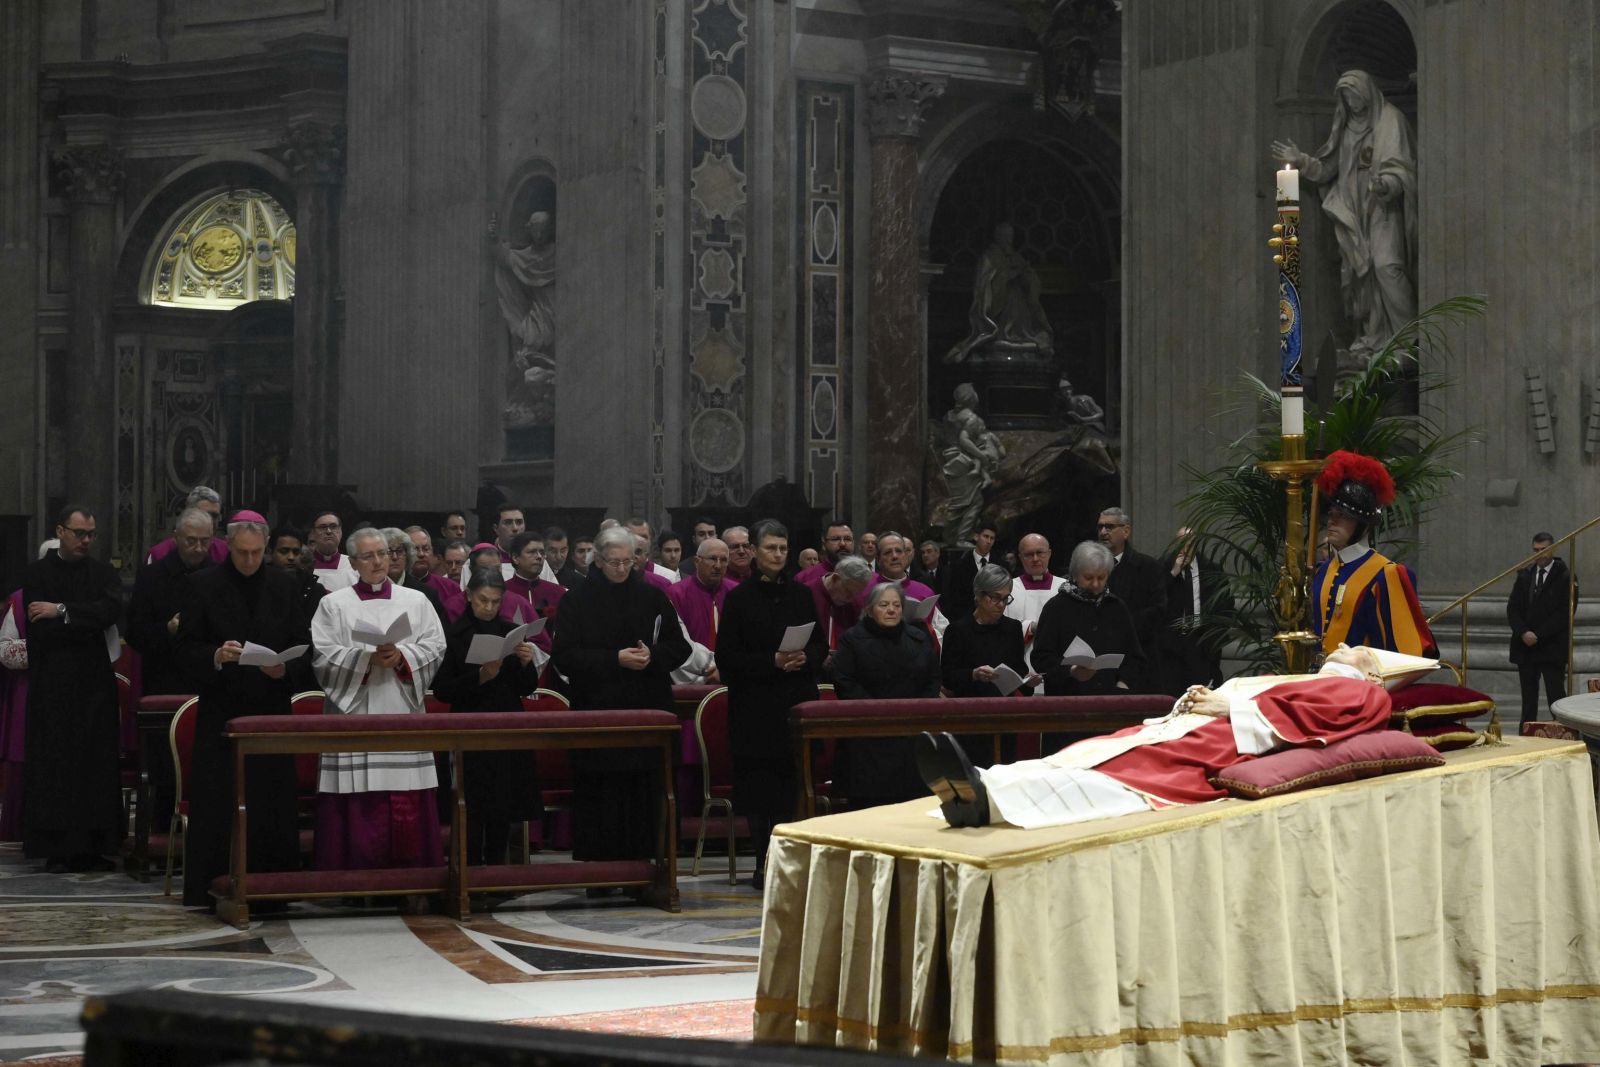 epa10386134 A handout photo made available by Vatican Media shows the body of late Pope Emeritus Benedict XVI (Joseph Ratzinger) as it lies in state in Saint Peter's Basilica for public viewing, Vatican City, 02 January 2023. Former Pope Benedict XVI died on 31 December at his Vatican residence, aged 95. For three days, starting from 02 January, the body will lay in state in St Peter's Basilica until the funeral on 05 January.  EPA/VATICAN MEDIA  HANDOUT EDITORIAL USE ONLY/NO SALES